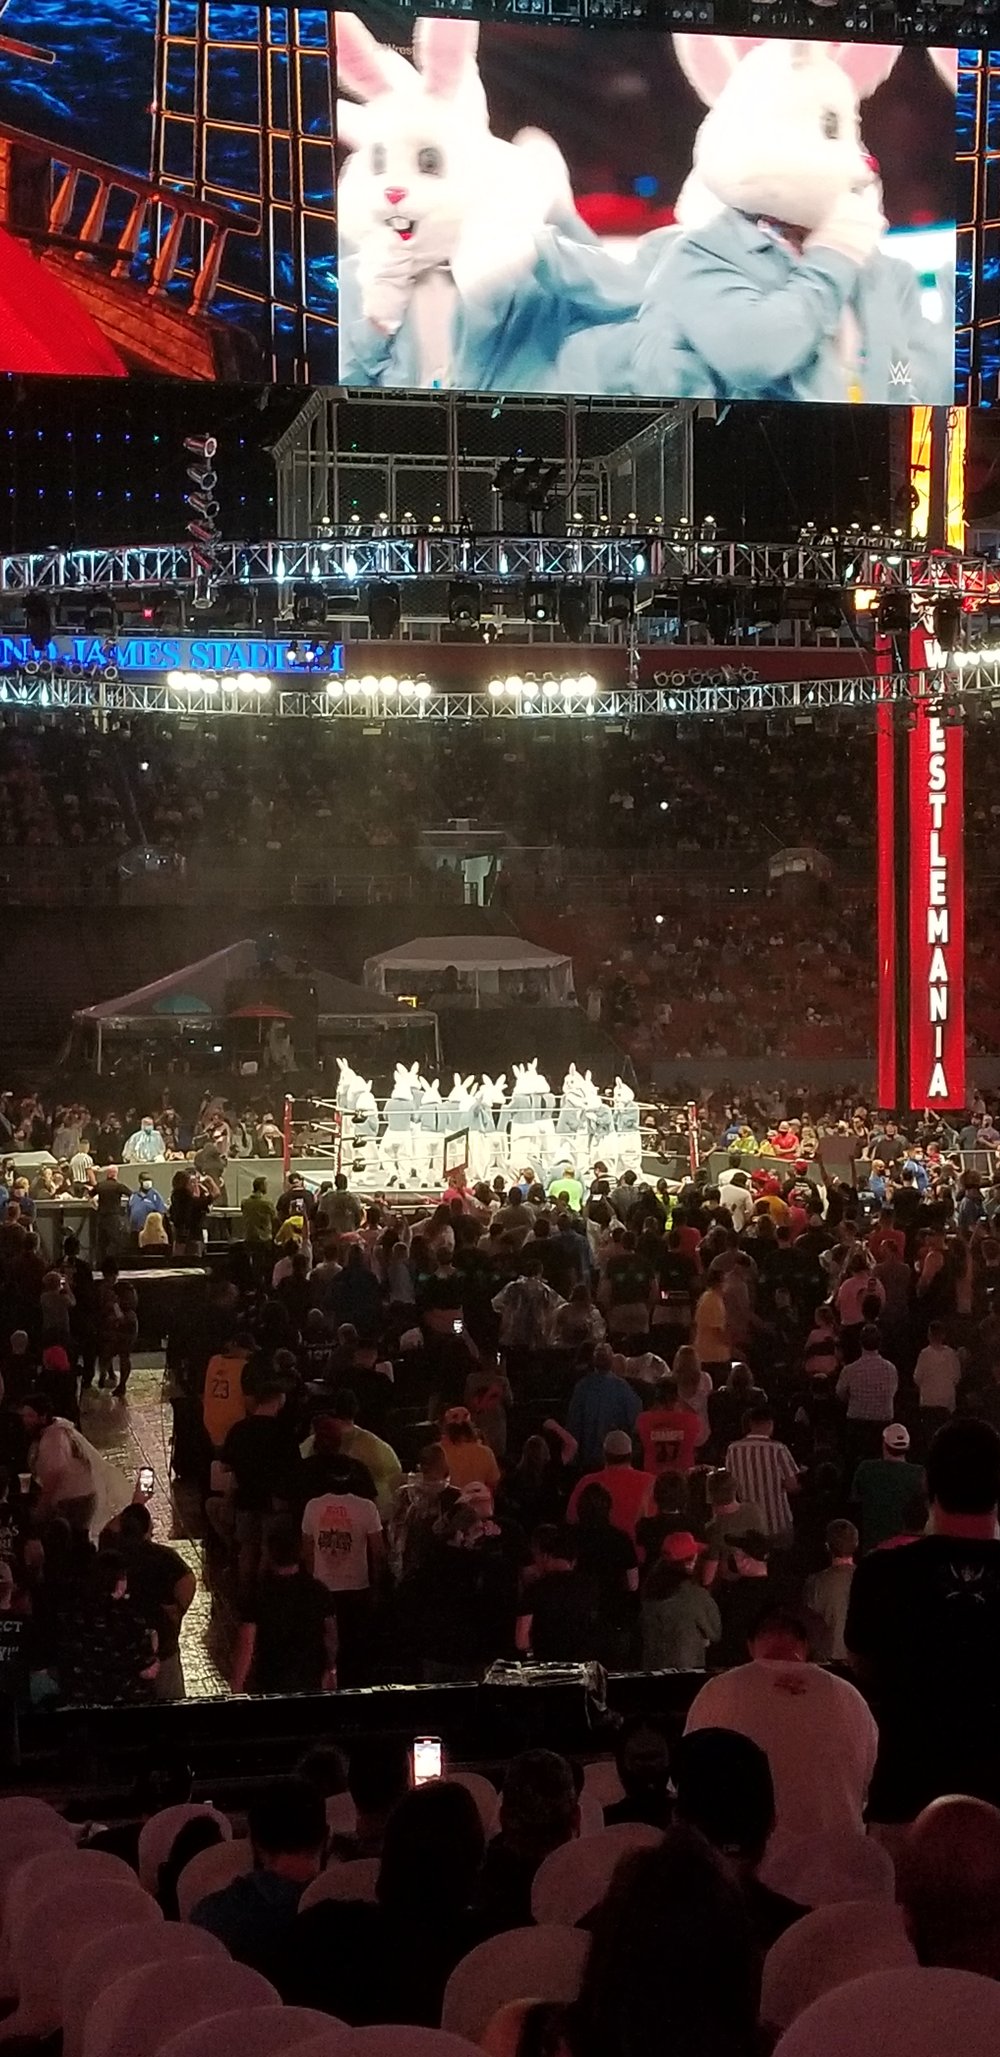 37 observations on attending WrestleMania 37 in Tampa